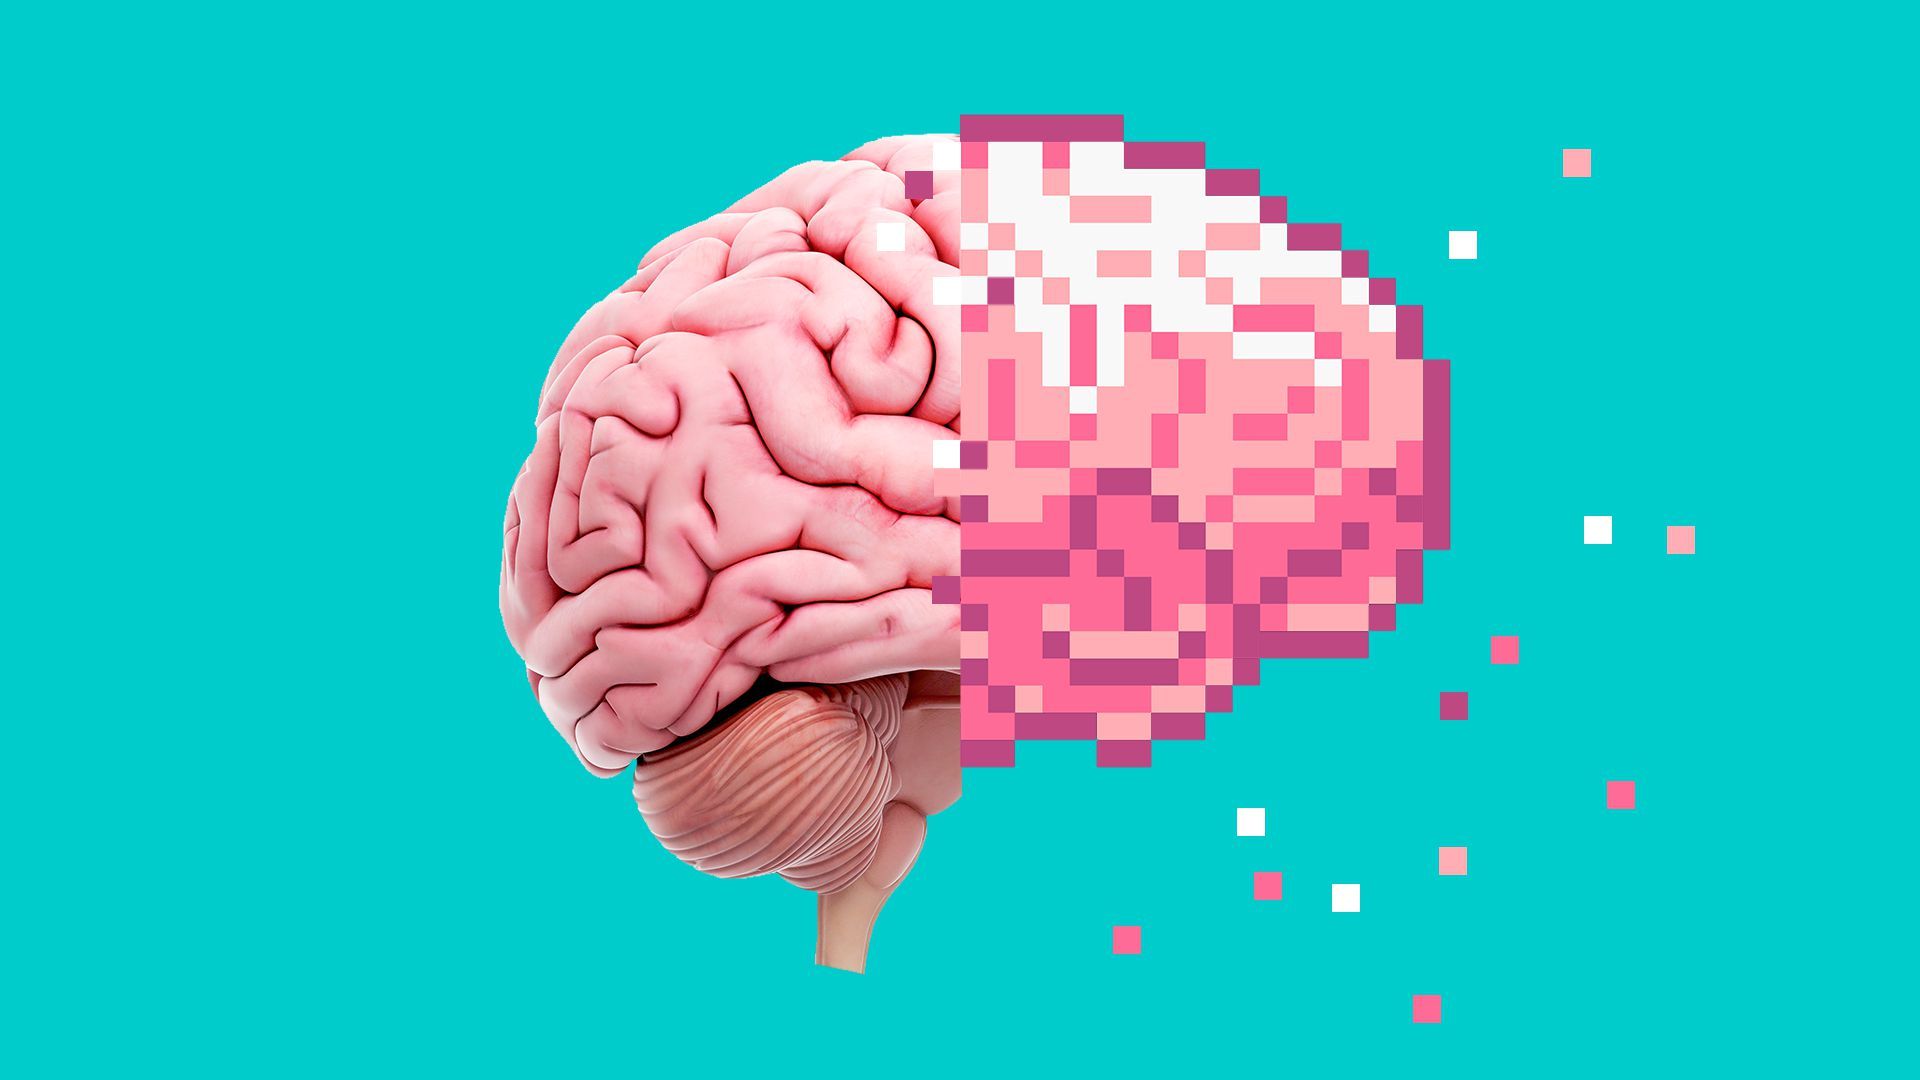 Illustration of a brain which is divided at the center and has a pixelated half